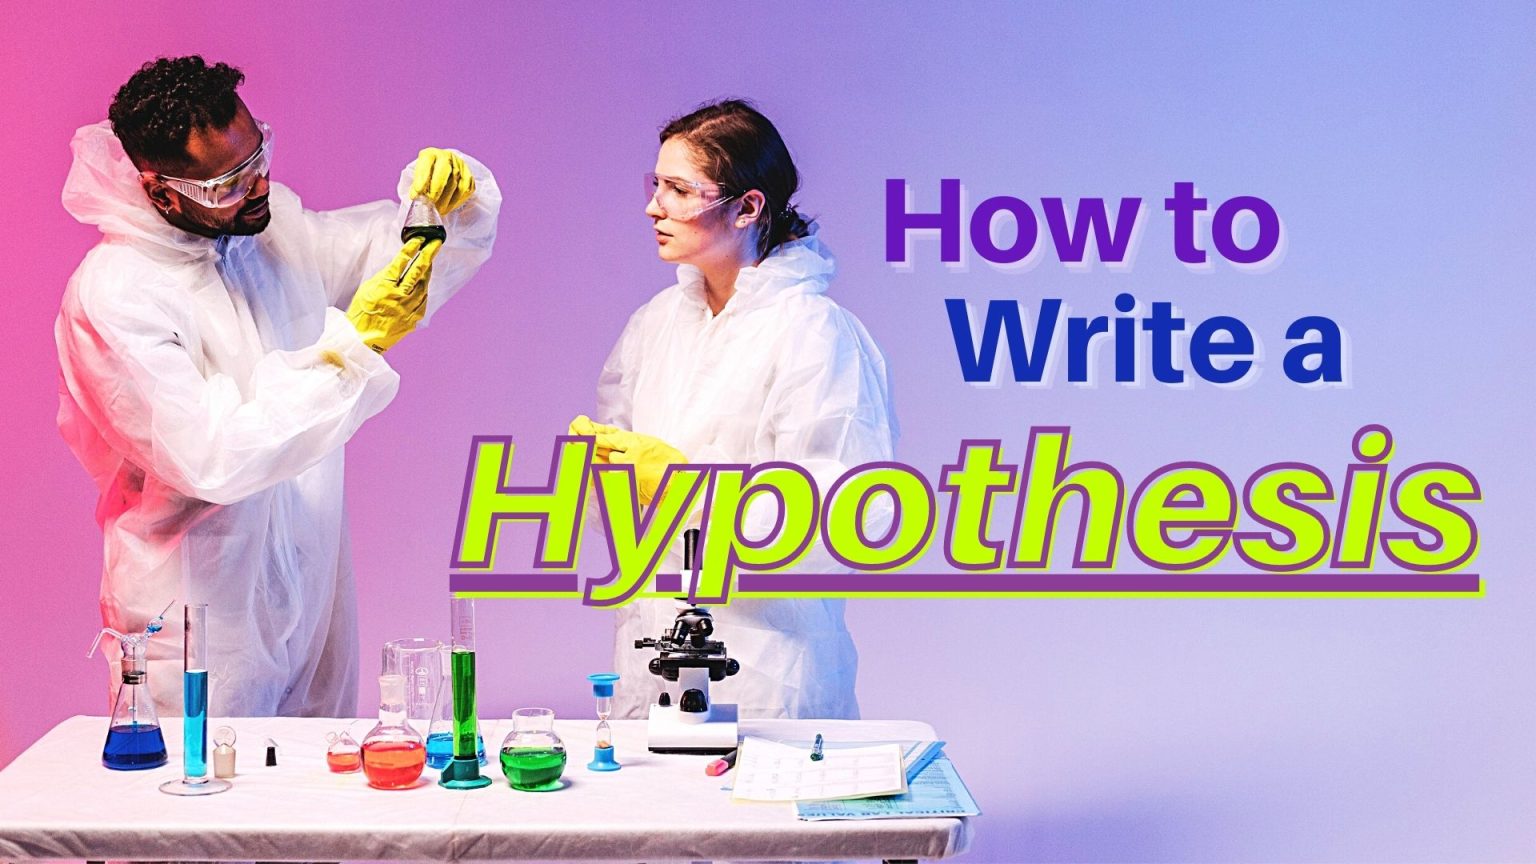 write a hypothesis for the scientists investigation